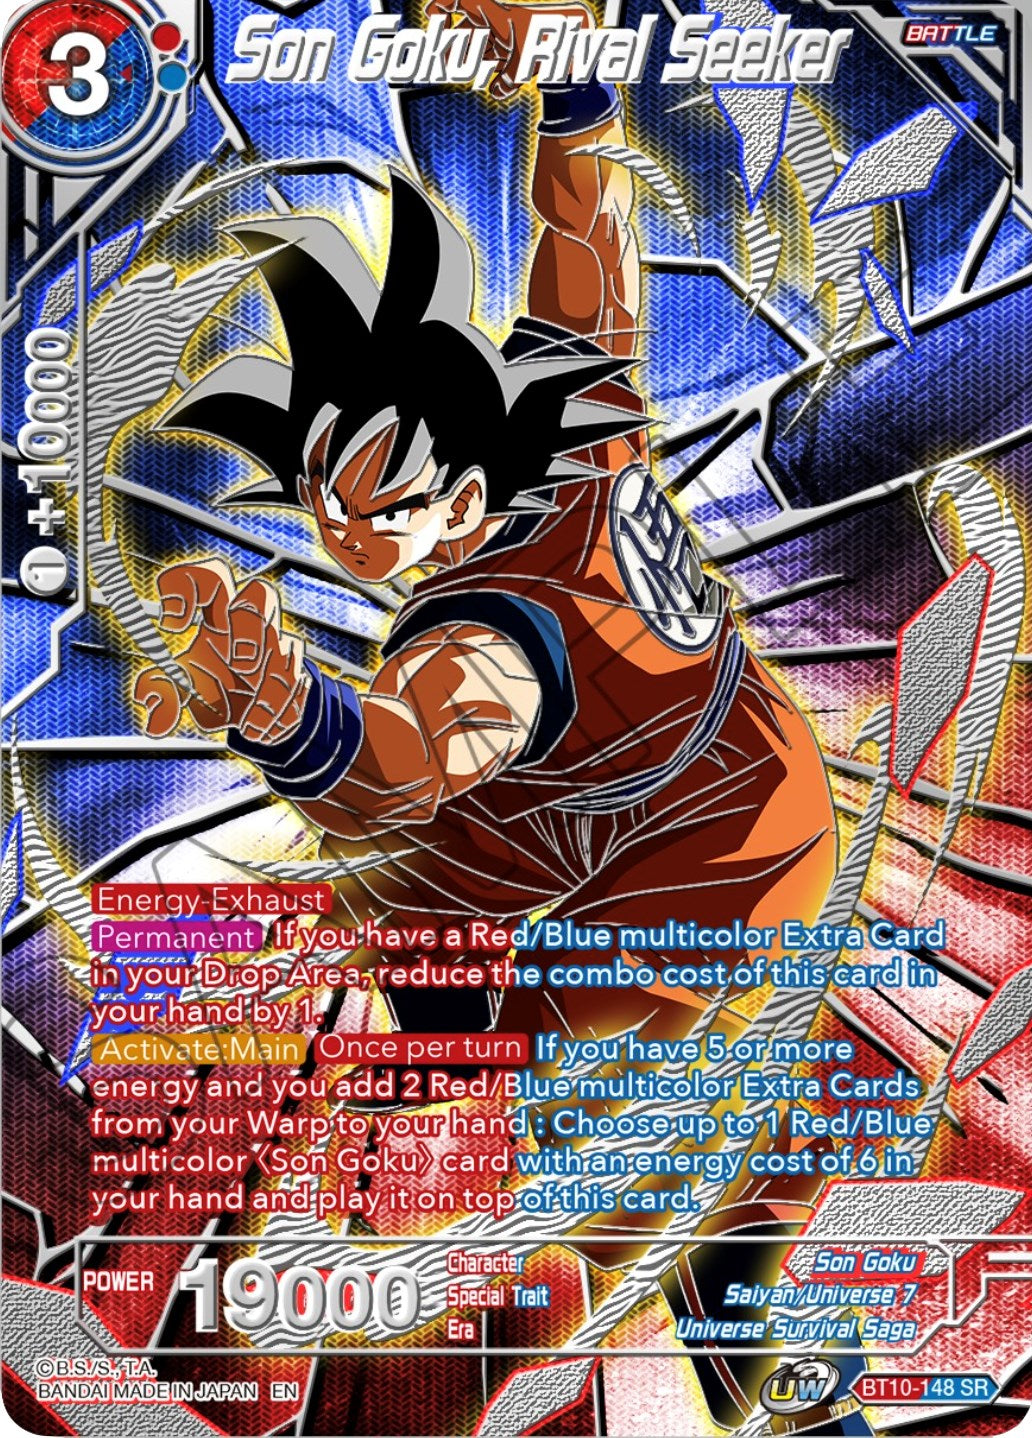 Son Goku, Rival Seeker (BT10-148) [Collector's Selection Vol. 3] | Total Play